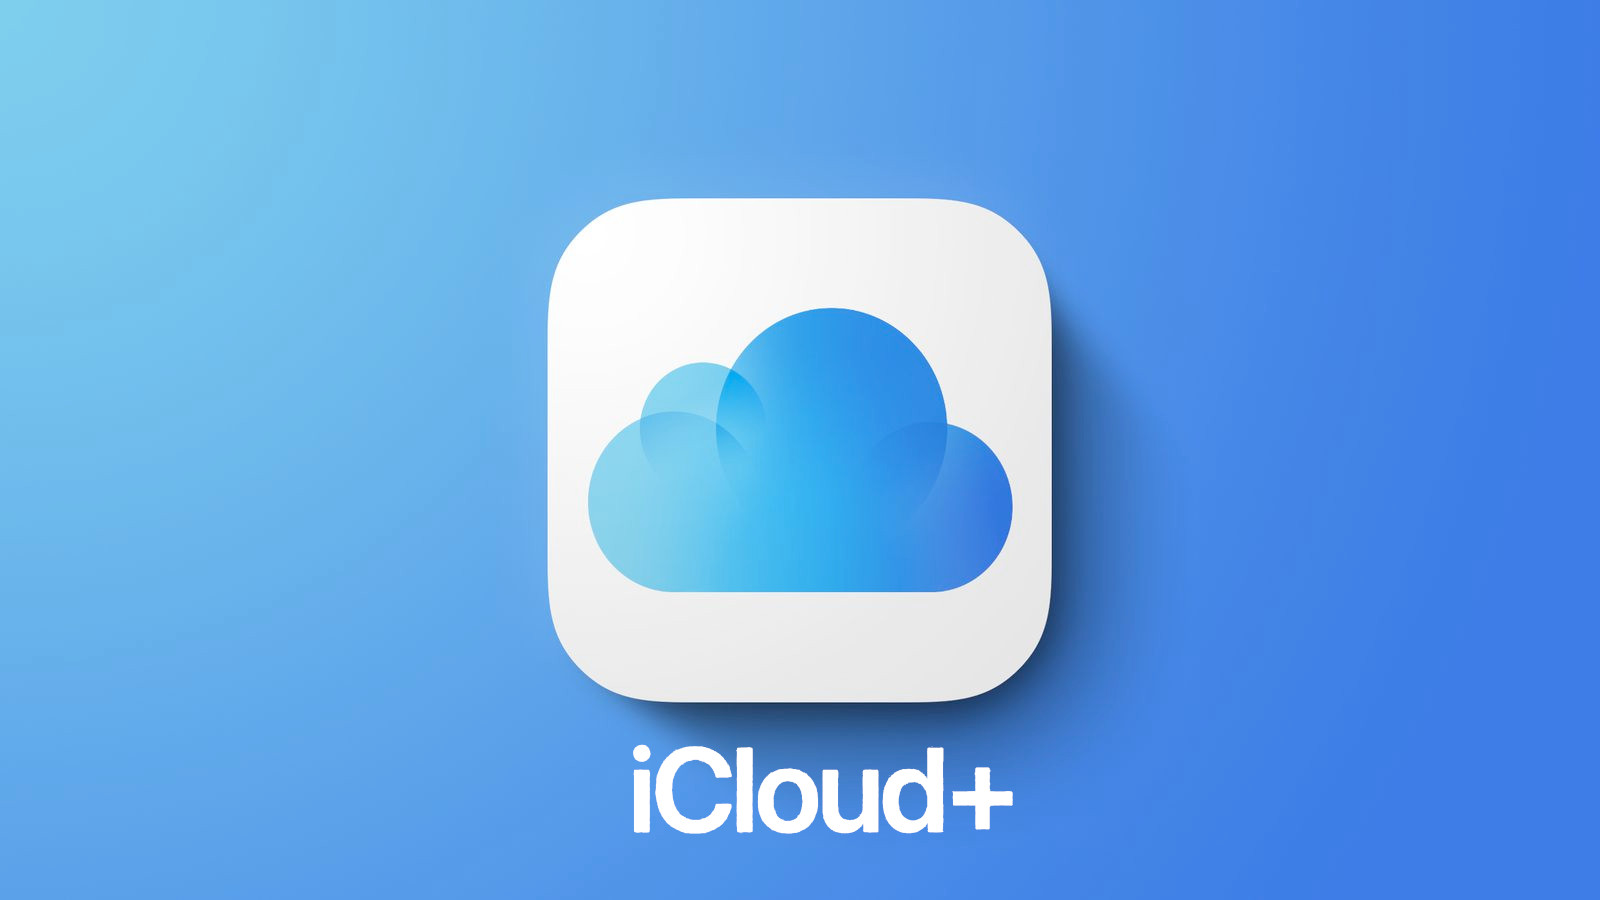 ICloud+ 50GB - 2+1 Months Trial Subscription US (ONLY FOR NEW ACCOUNTS)